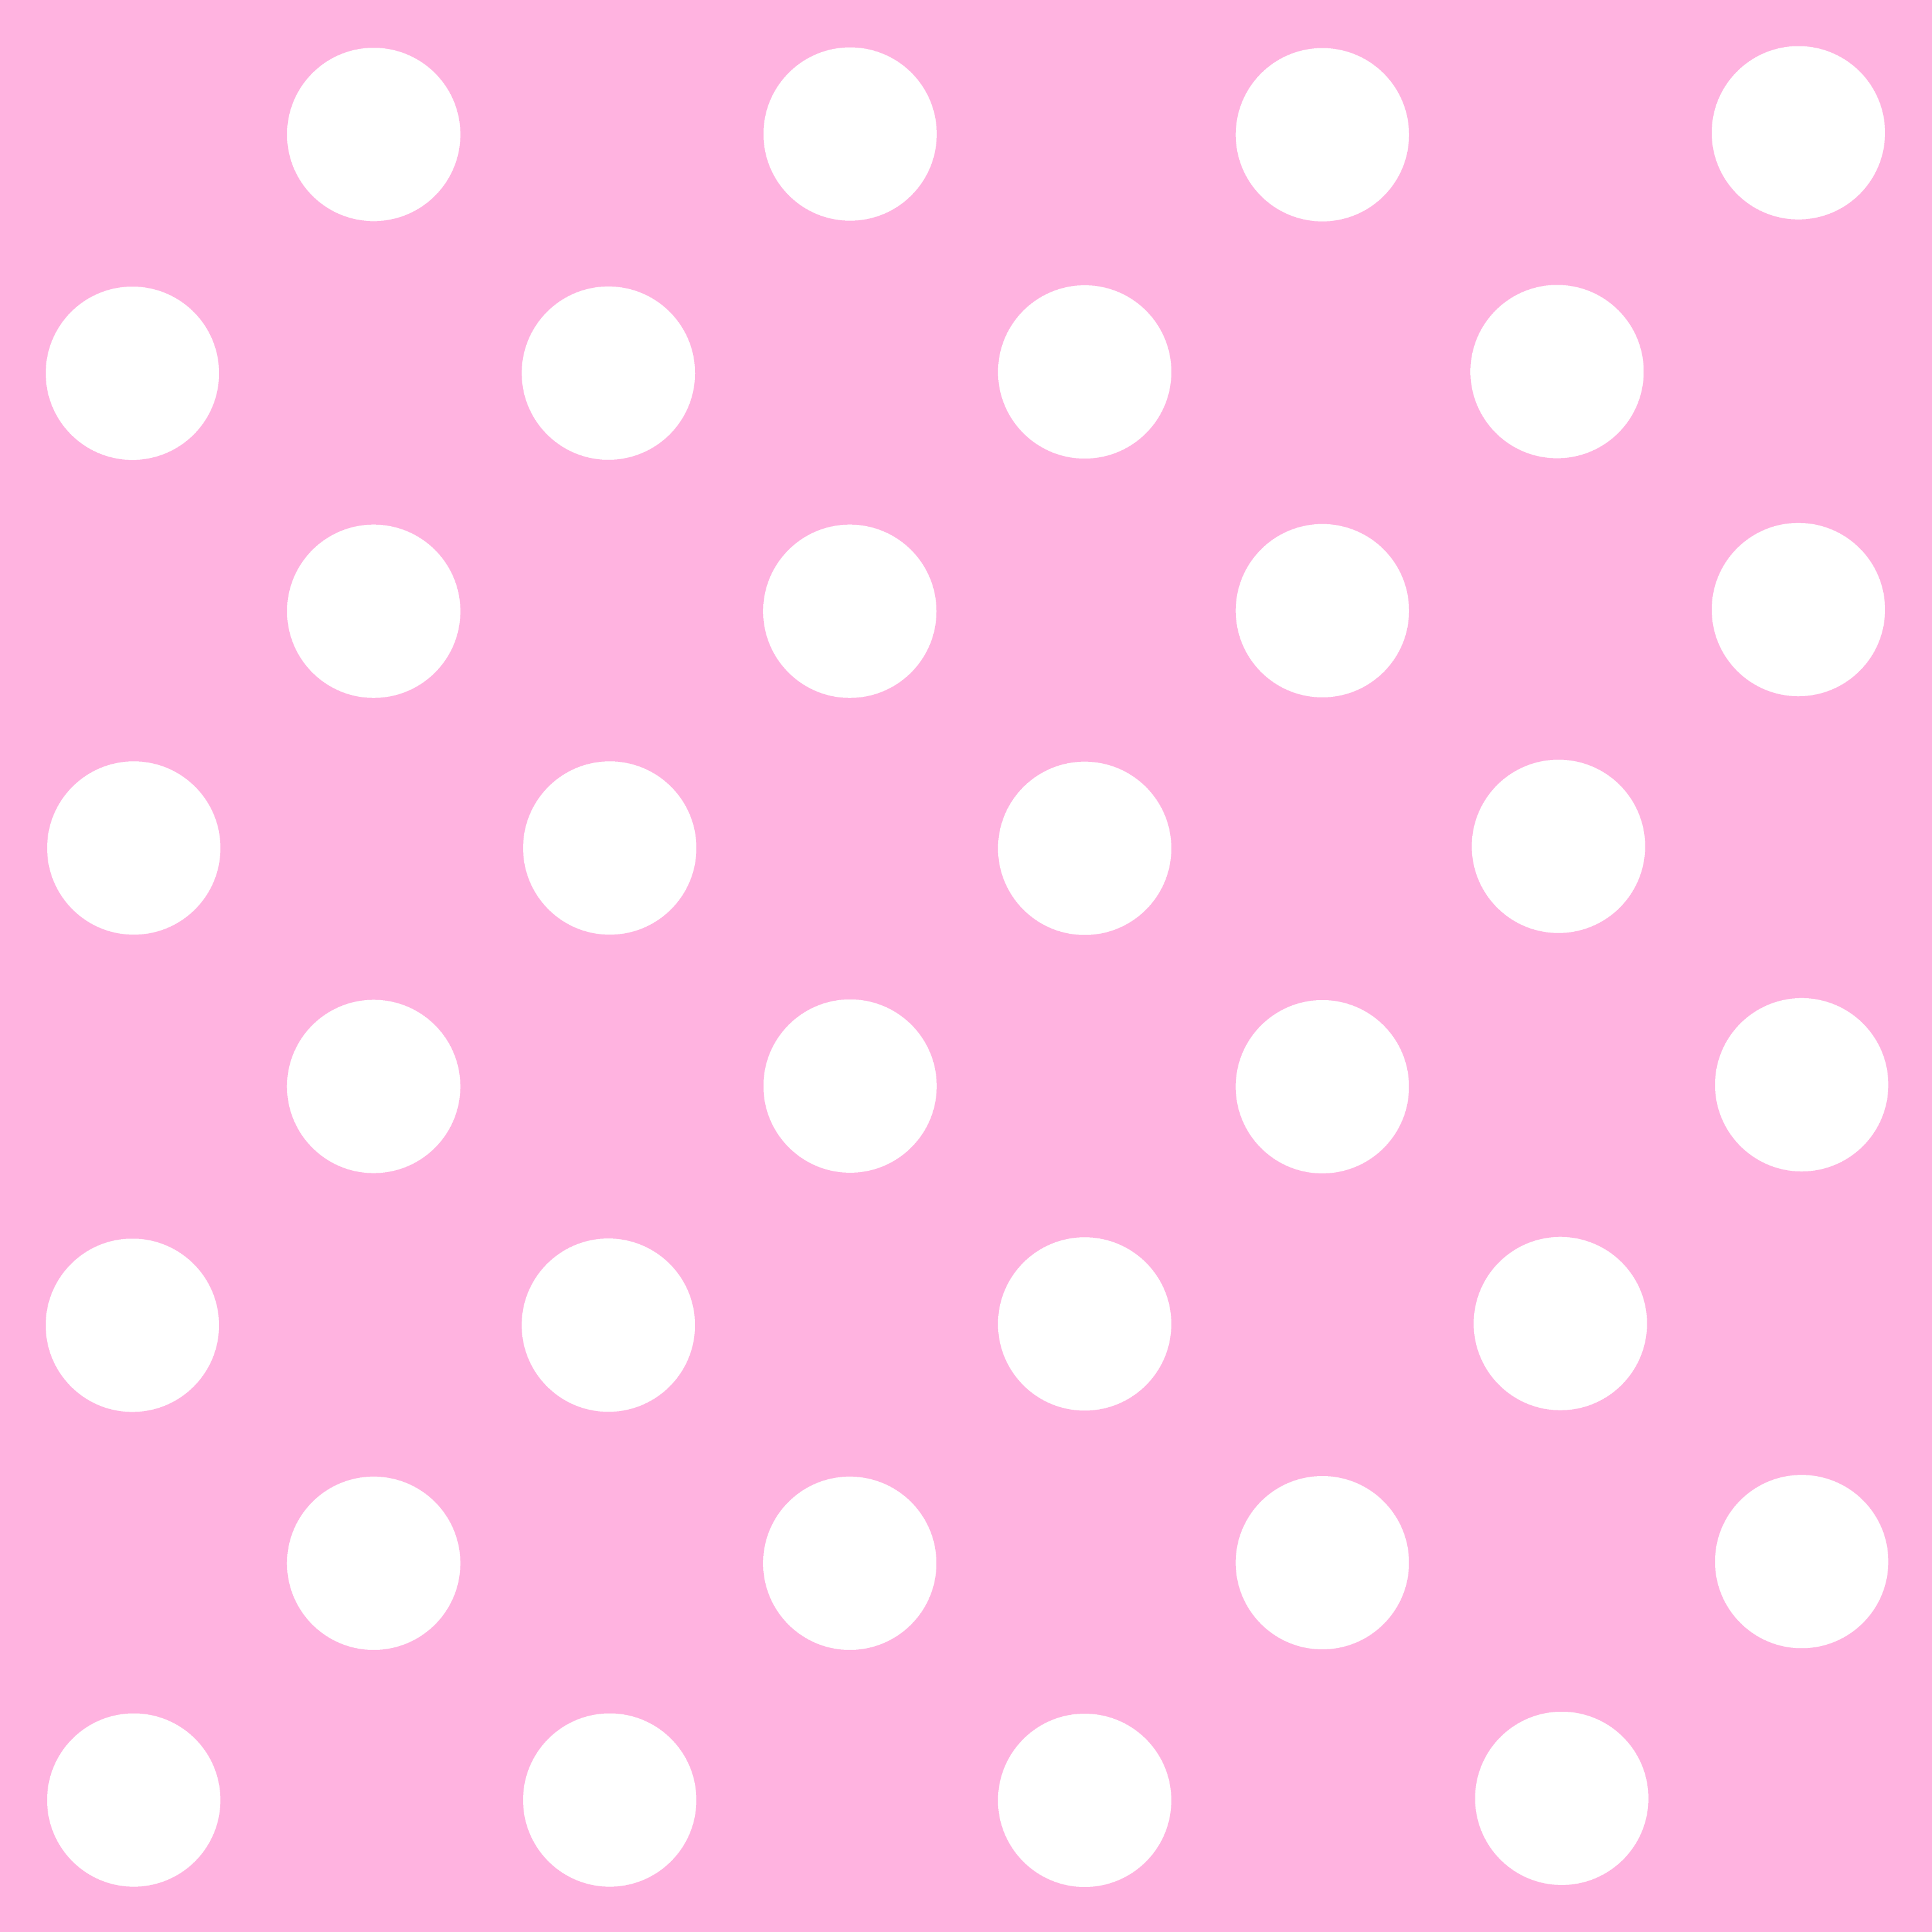 Pink And White Polka Dot Wallpaper Clipart Free To Use Clip Art